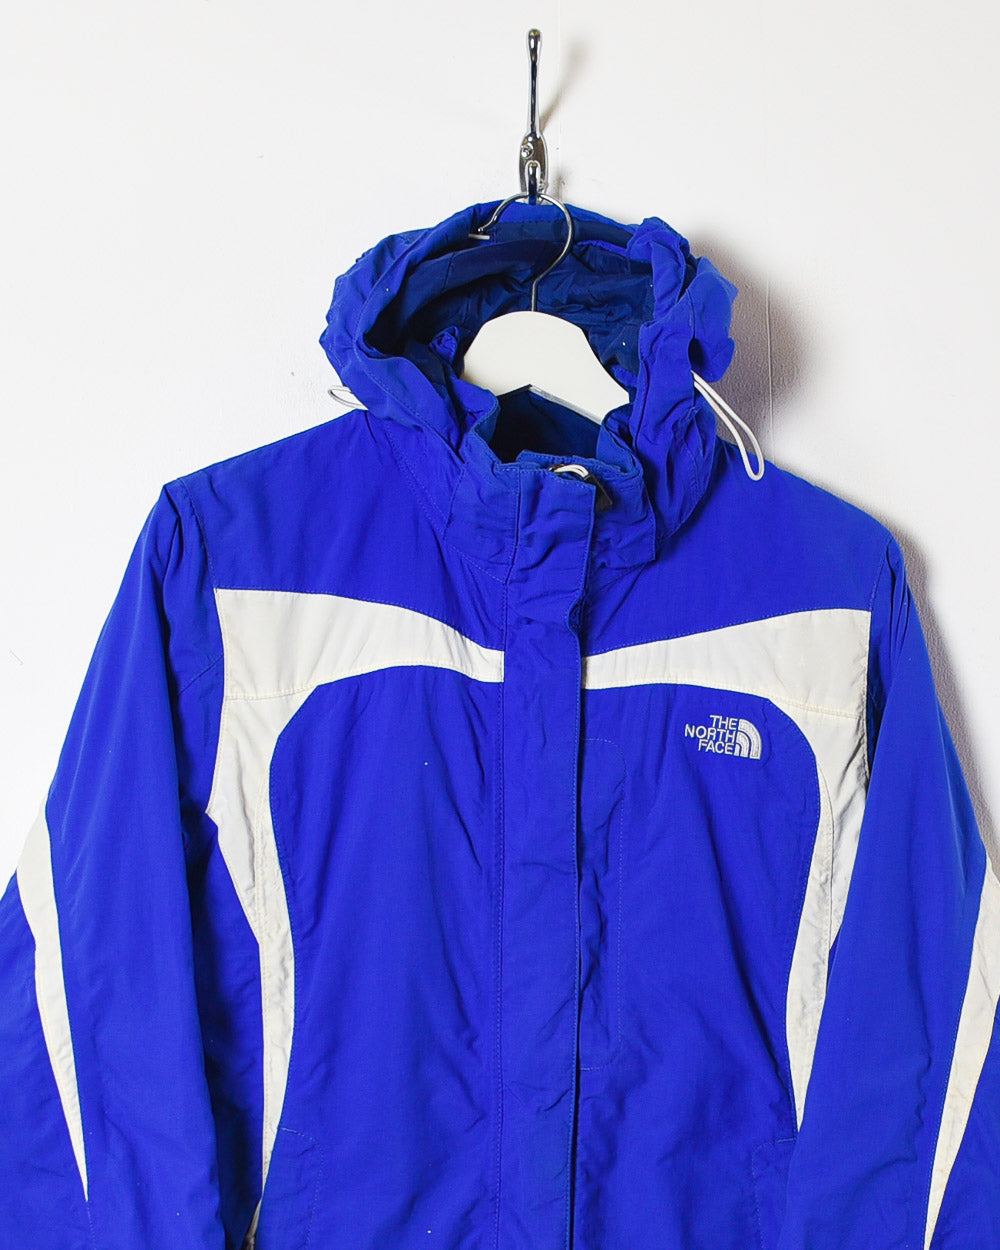 Blue The North Face Women's Hooded Windbreaker Jacket - Small 